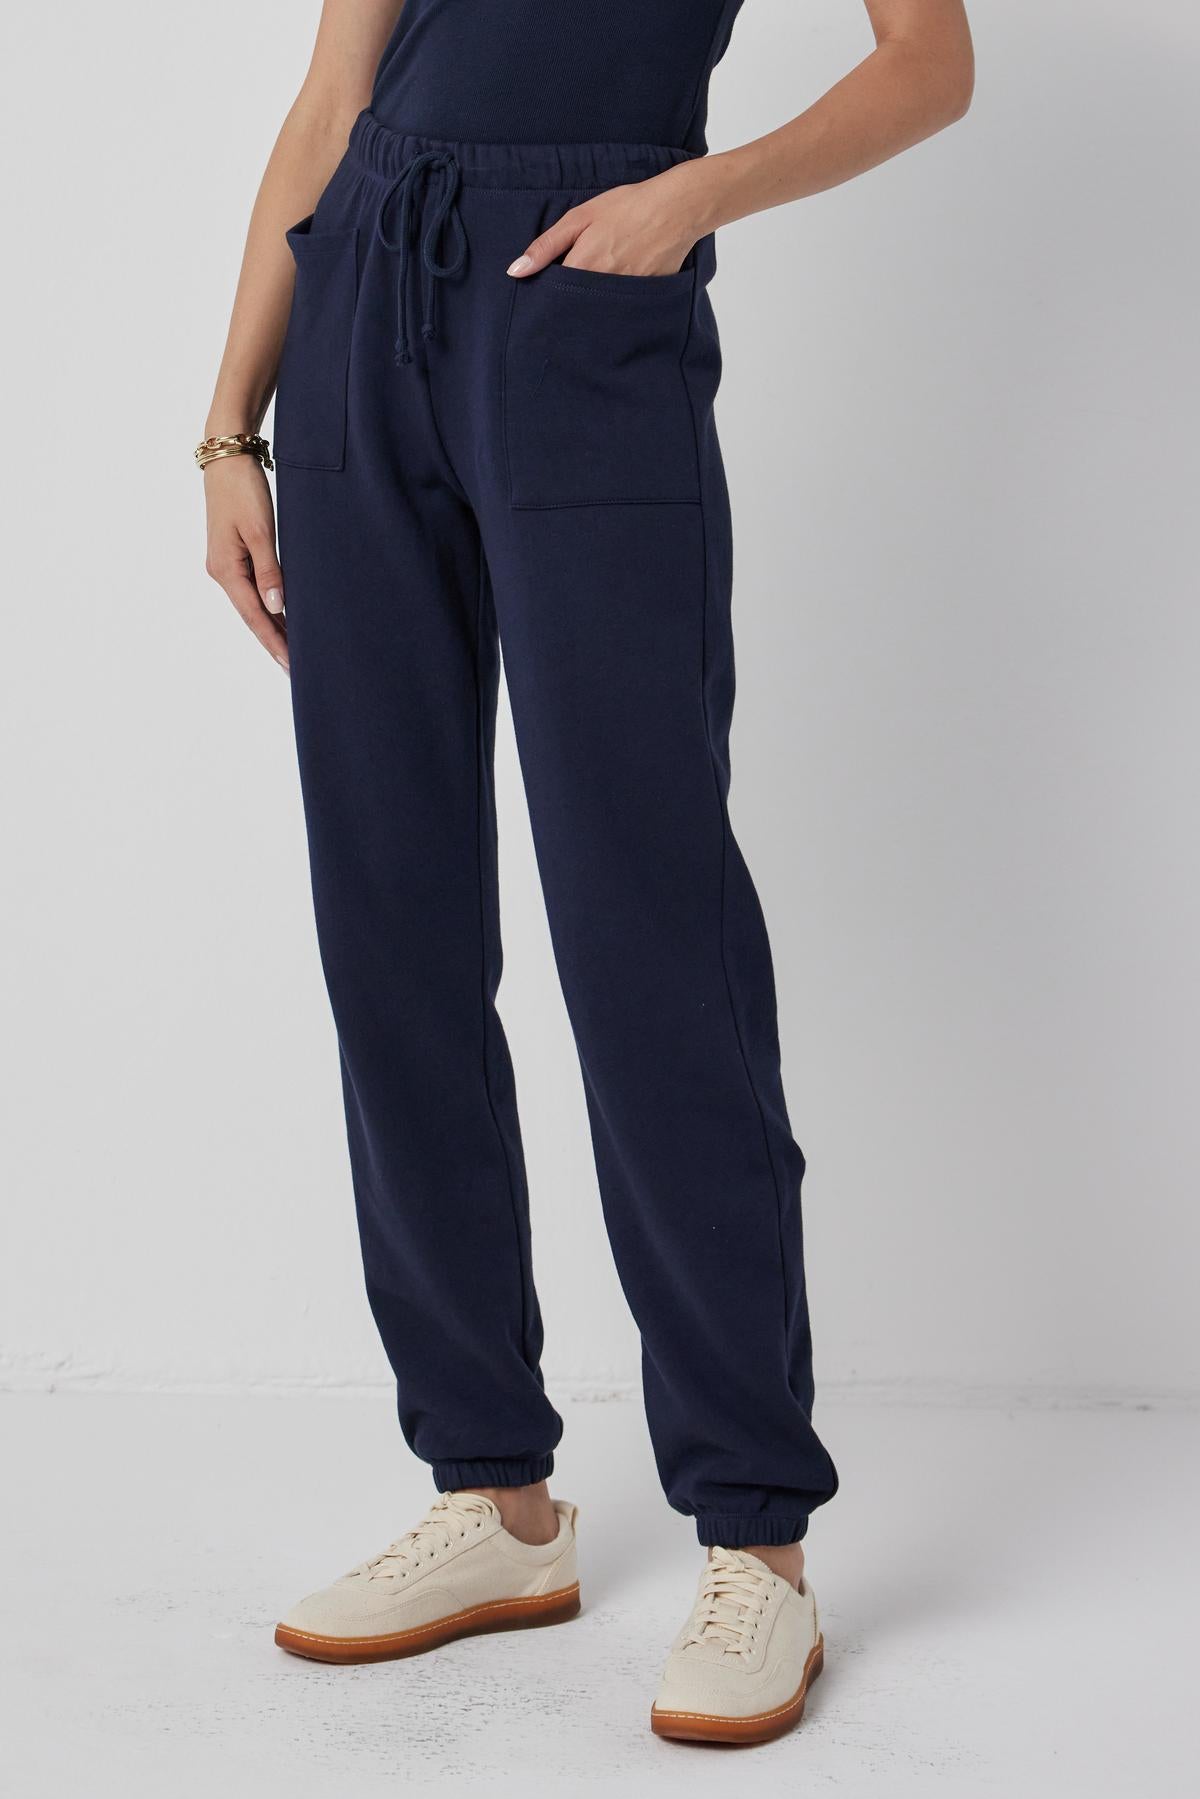   The model is wearing a Velvet by Jenny Graham WESTLAKE SWEATPANT with pockets. 